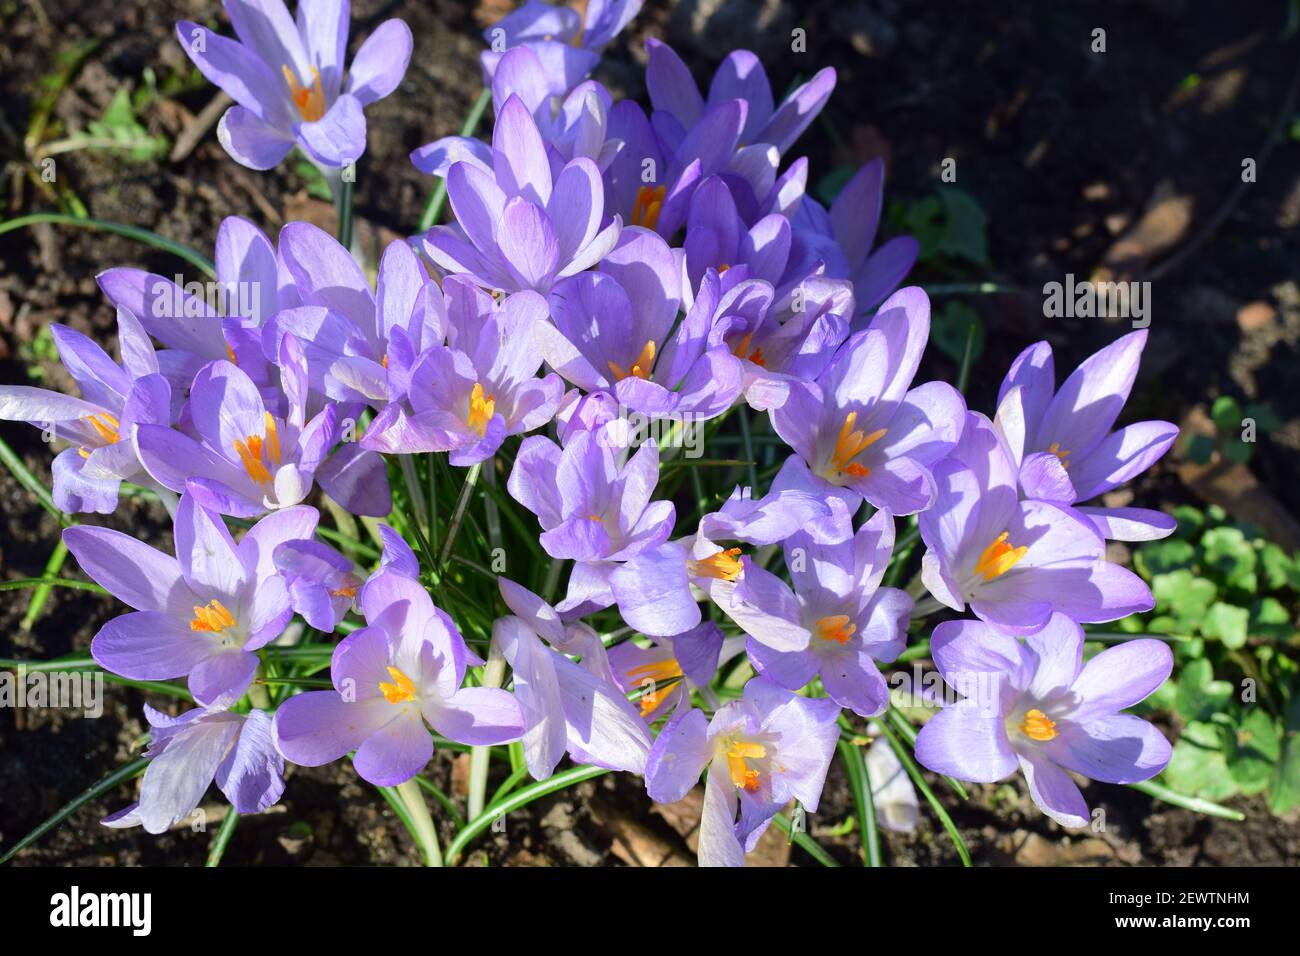 Crocus bundle on a meadow in the park Stock Photo